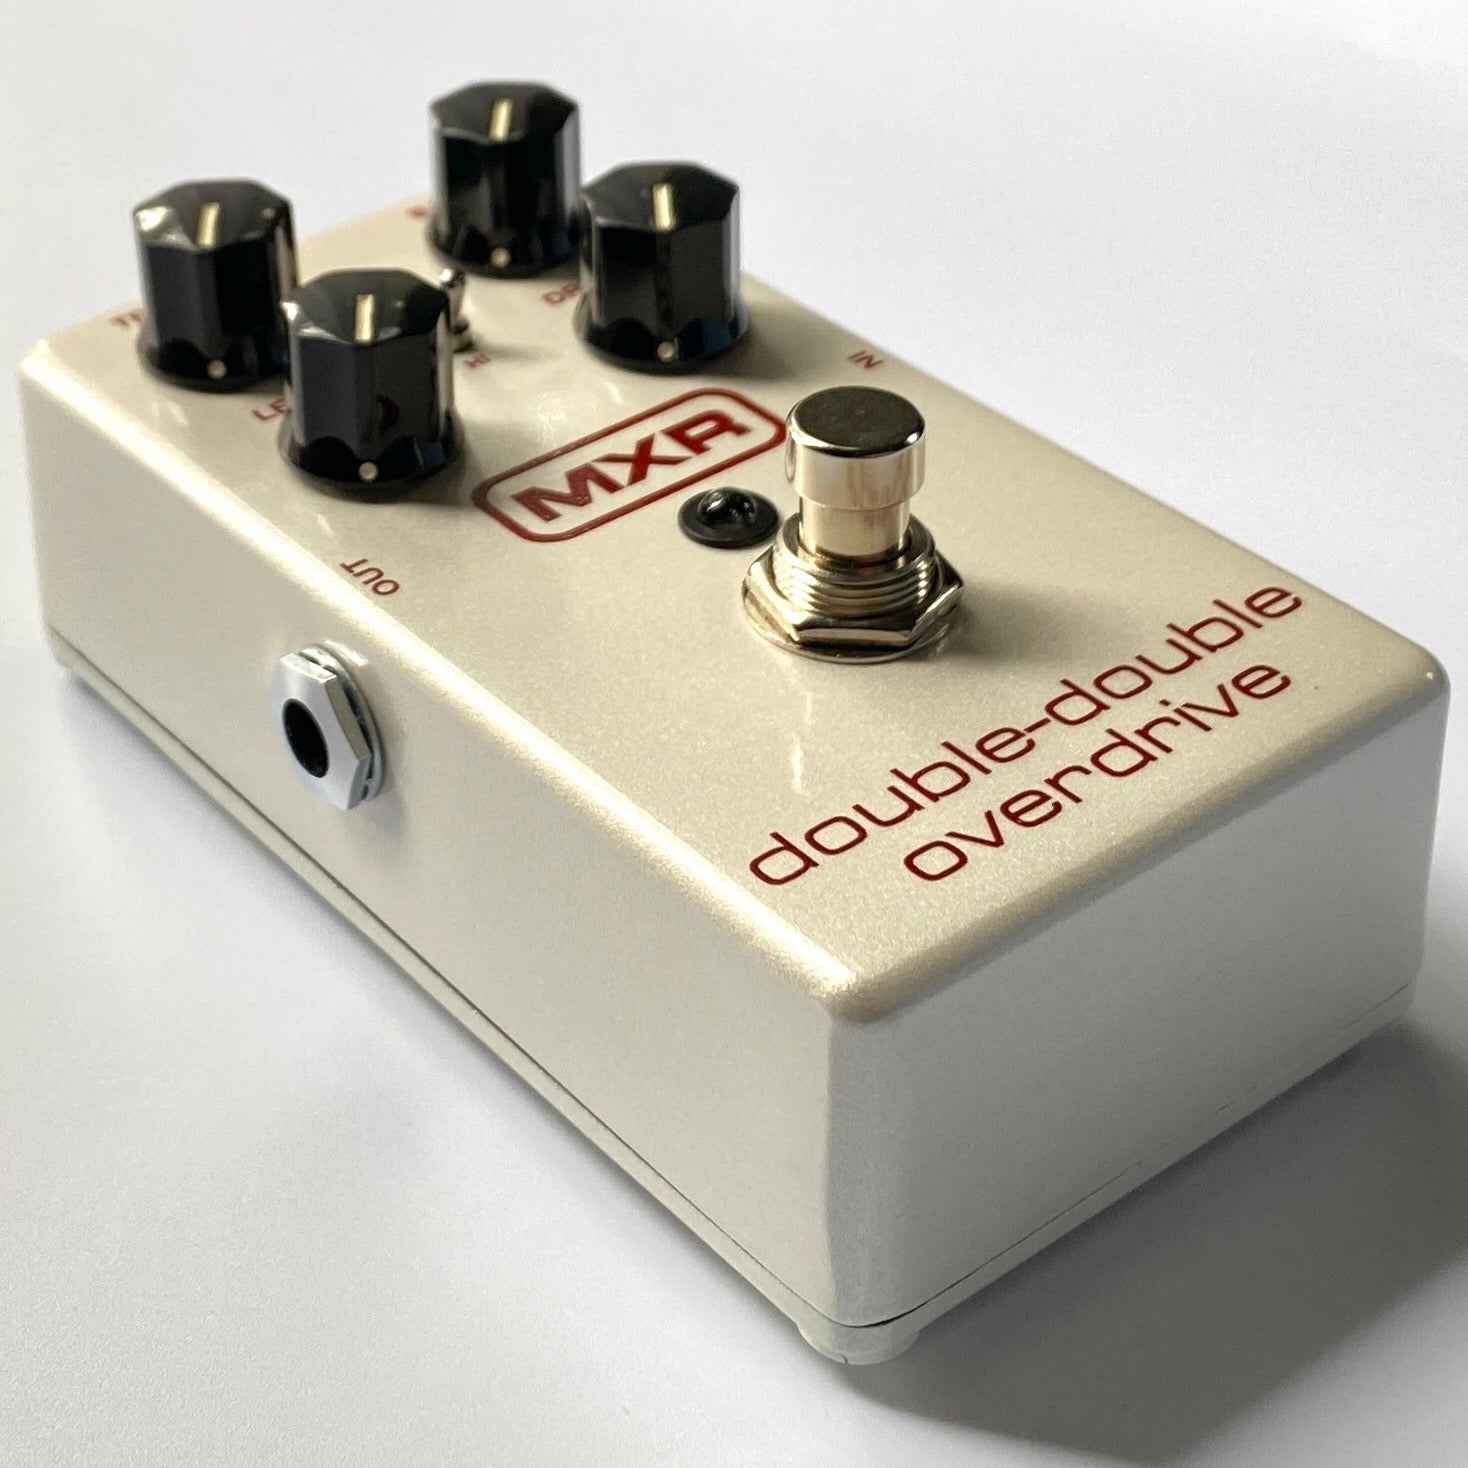 M250 DOUBLE-DOUBLE™ OVERDRIVE